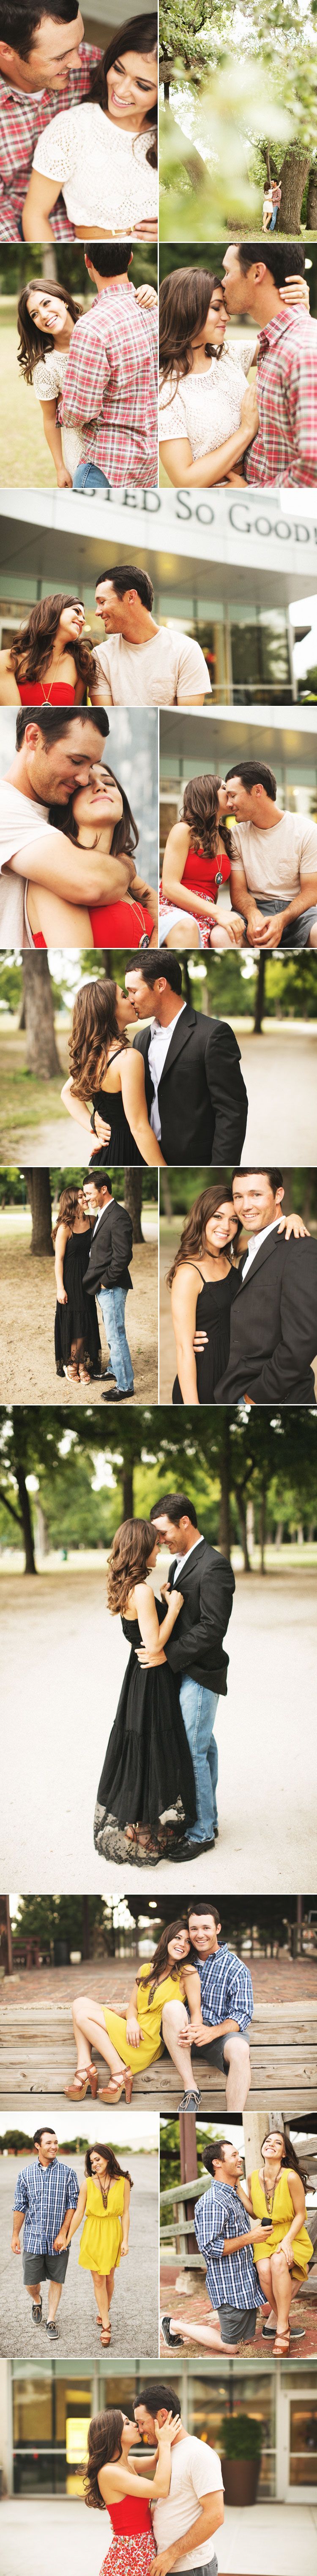 engagement photo ideas. too cute!